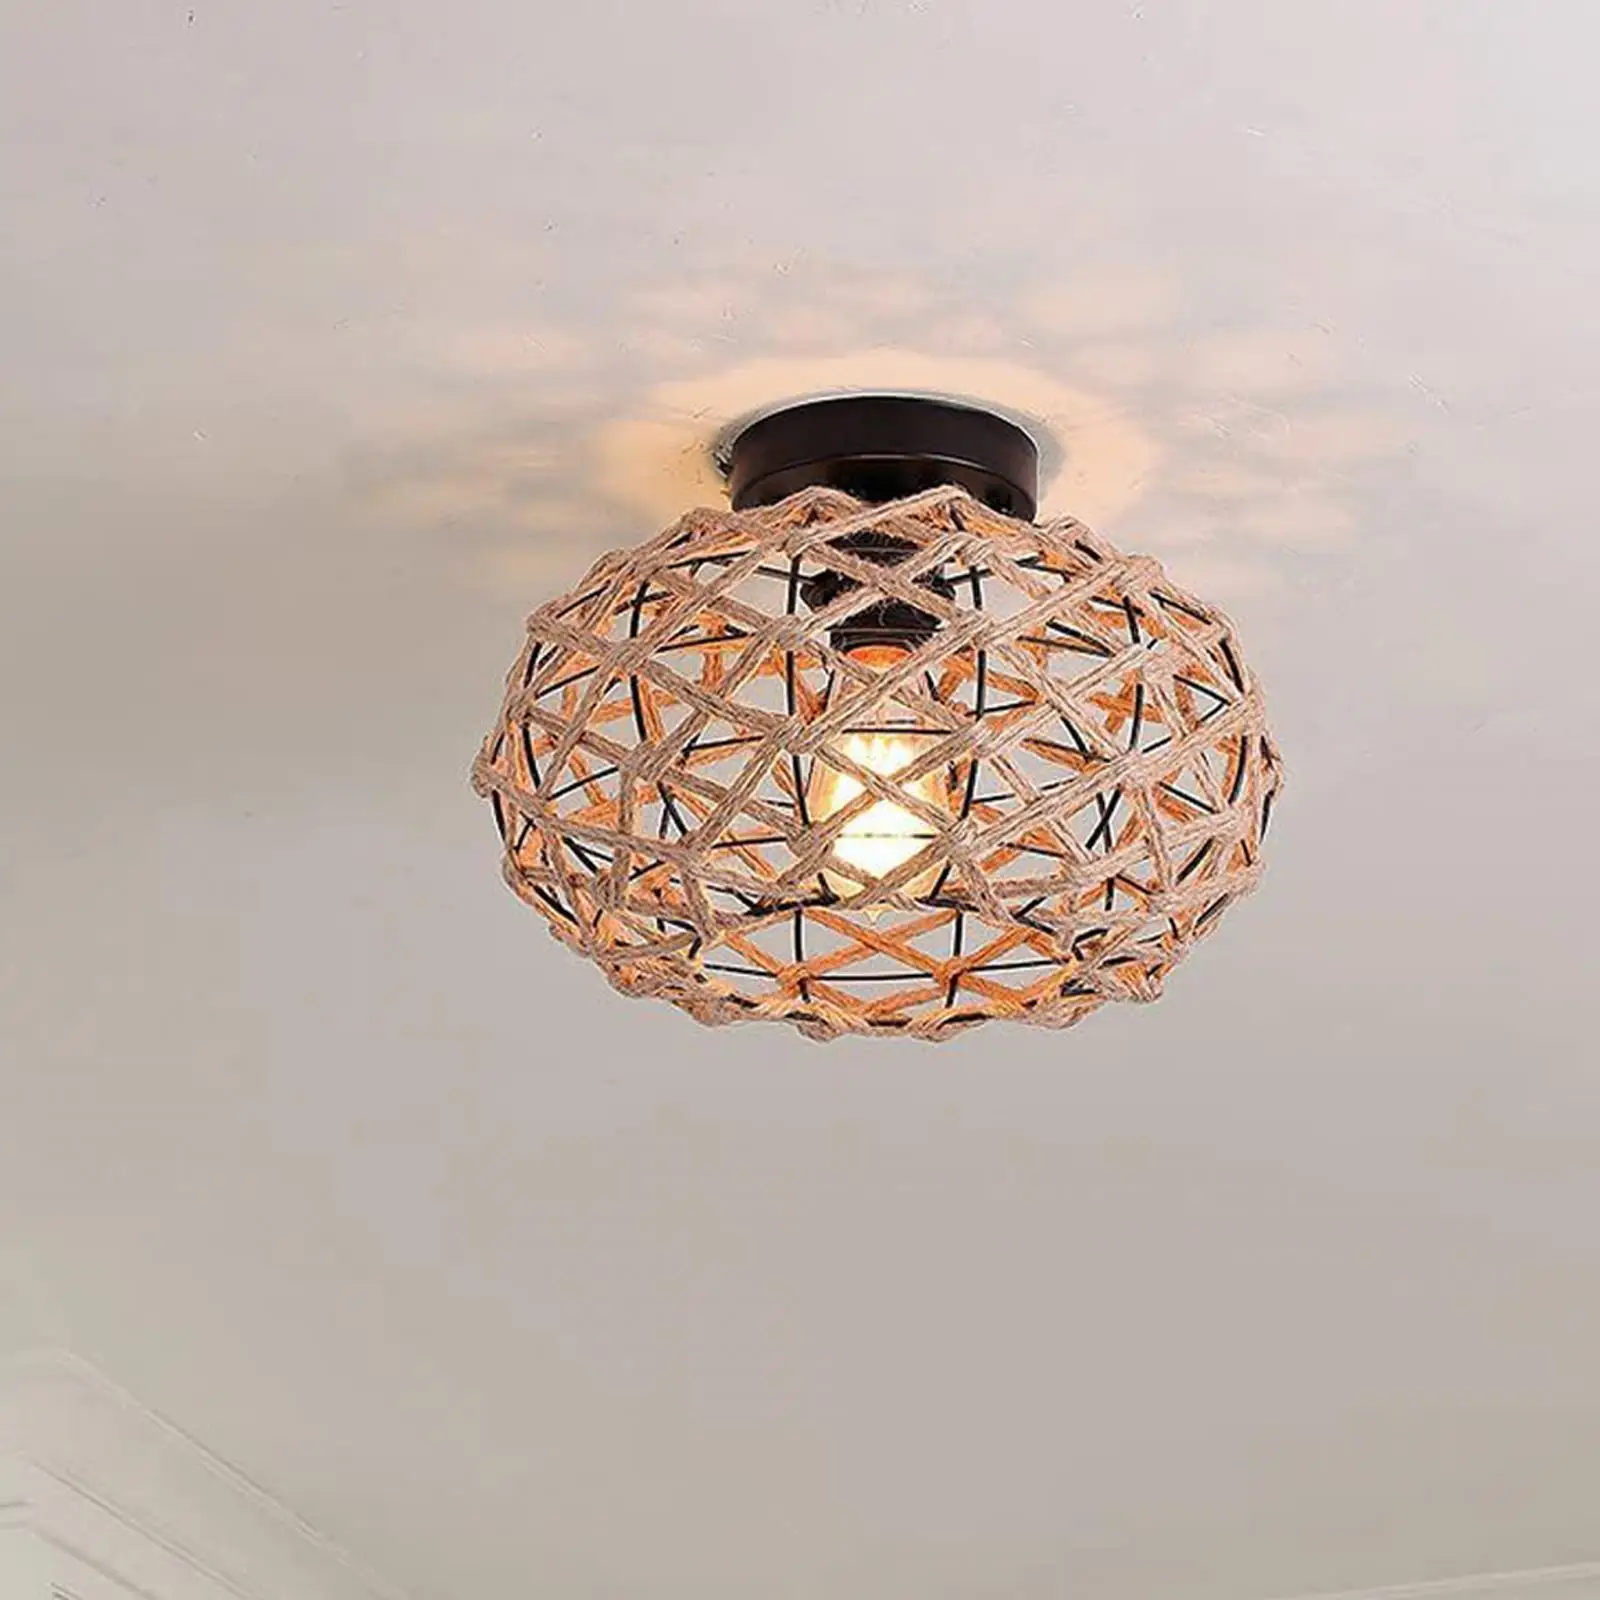 Woven Lampshade Bedside Lamp Ceiling Lamps Floor Lamps Hanging Pendant Lighting for Cafe Kitchen Outdoor Living Room Restaurant